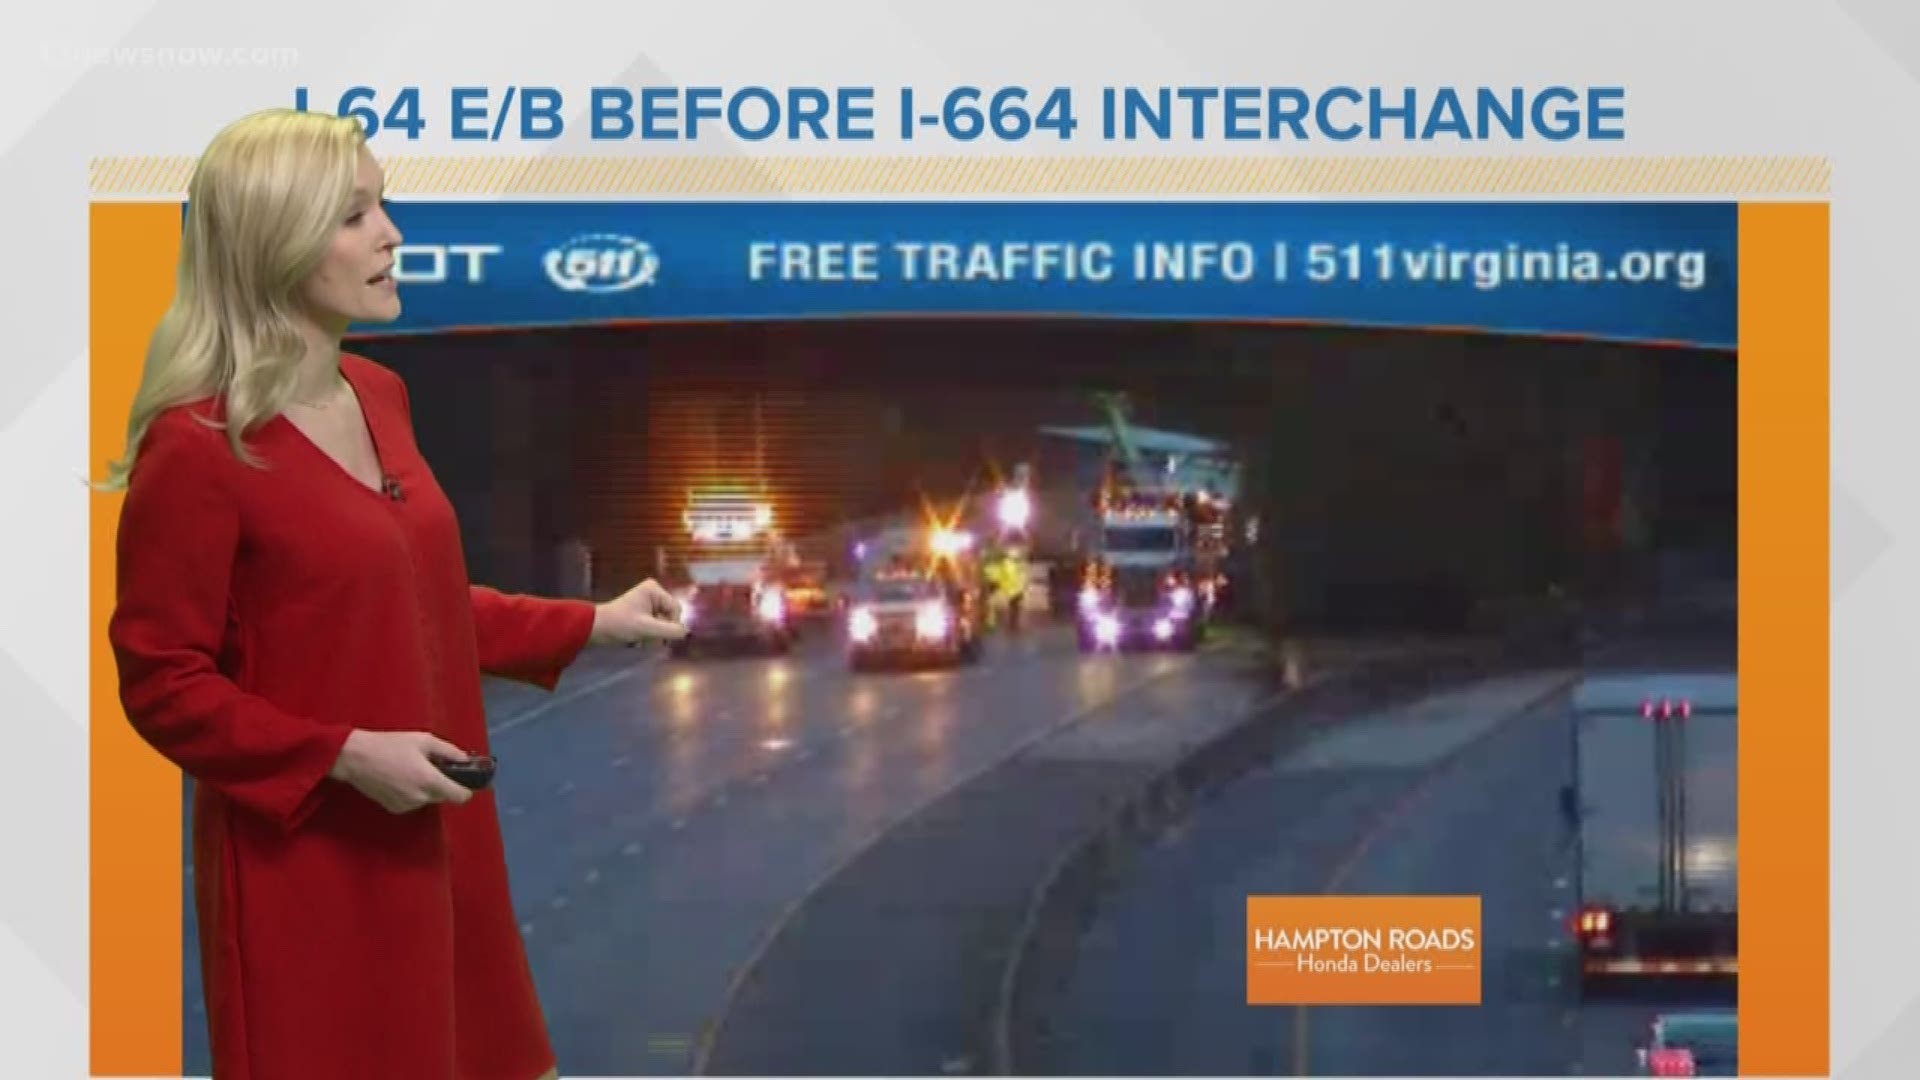 All east lanes are closed until the diesel fuel spill is cleaned up. The crash happened near the I-664 Interchange in Hampton.